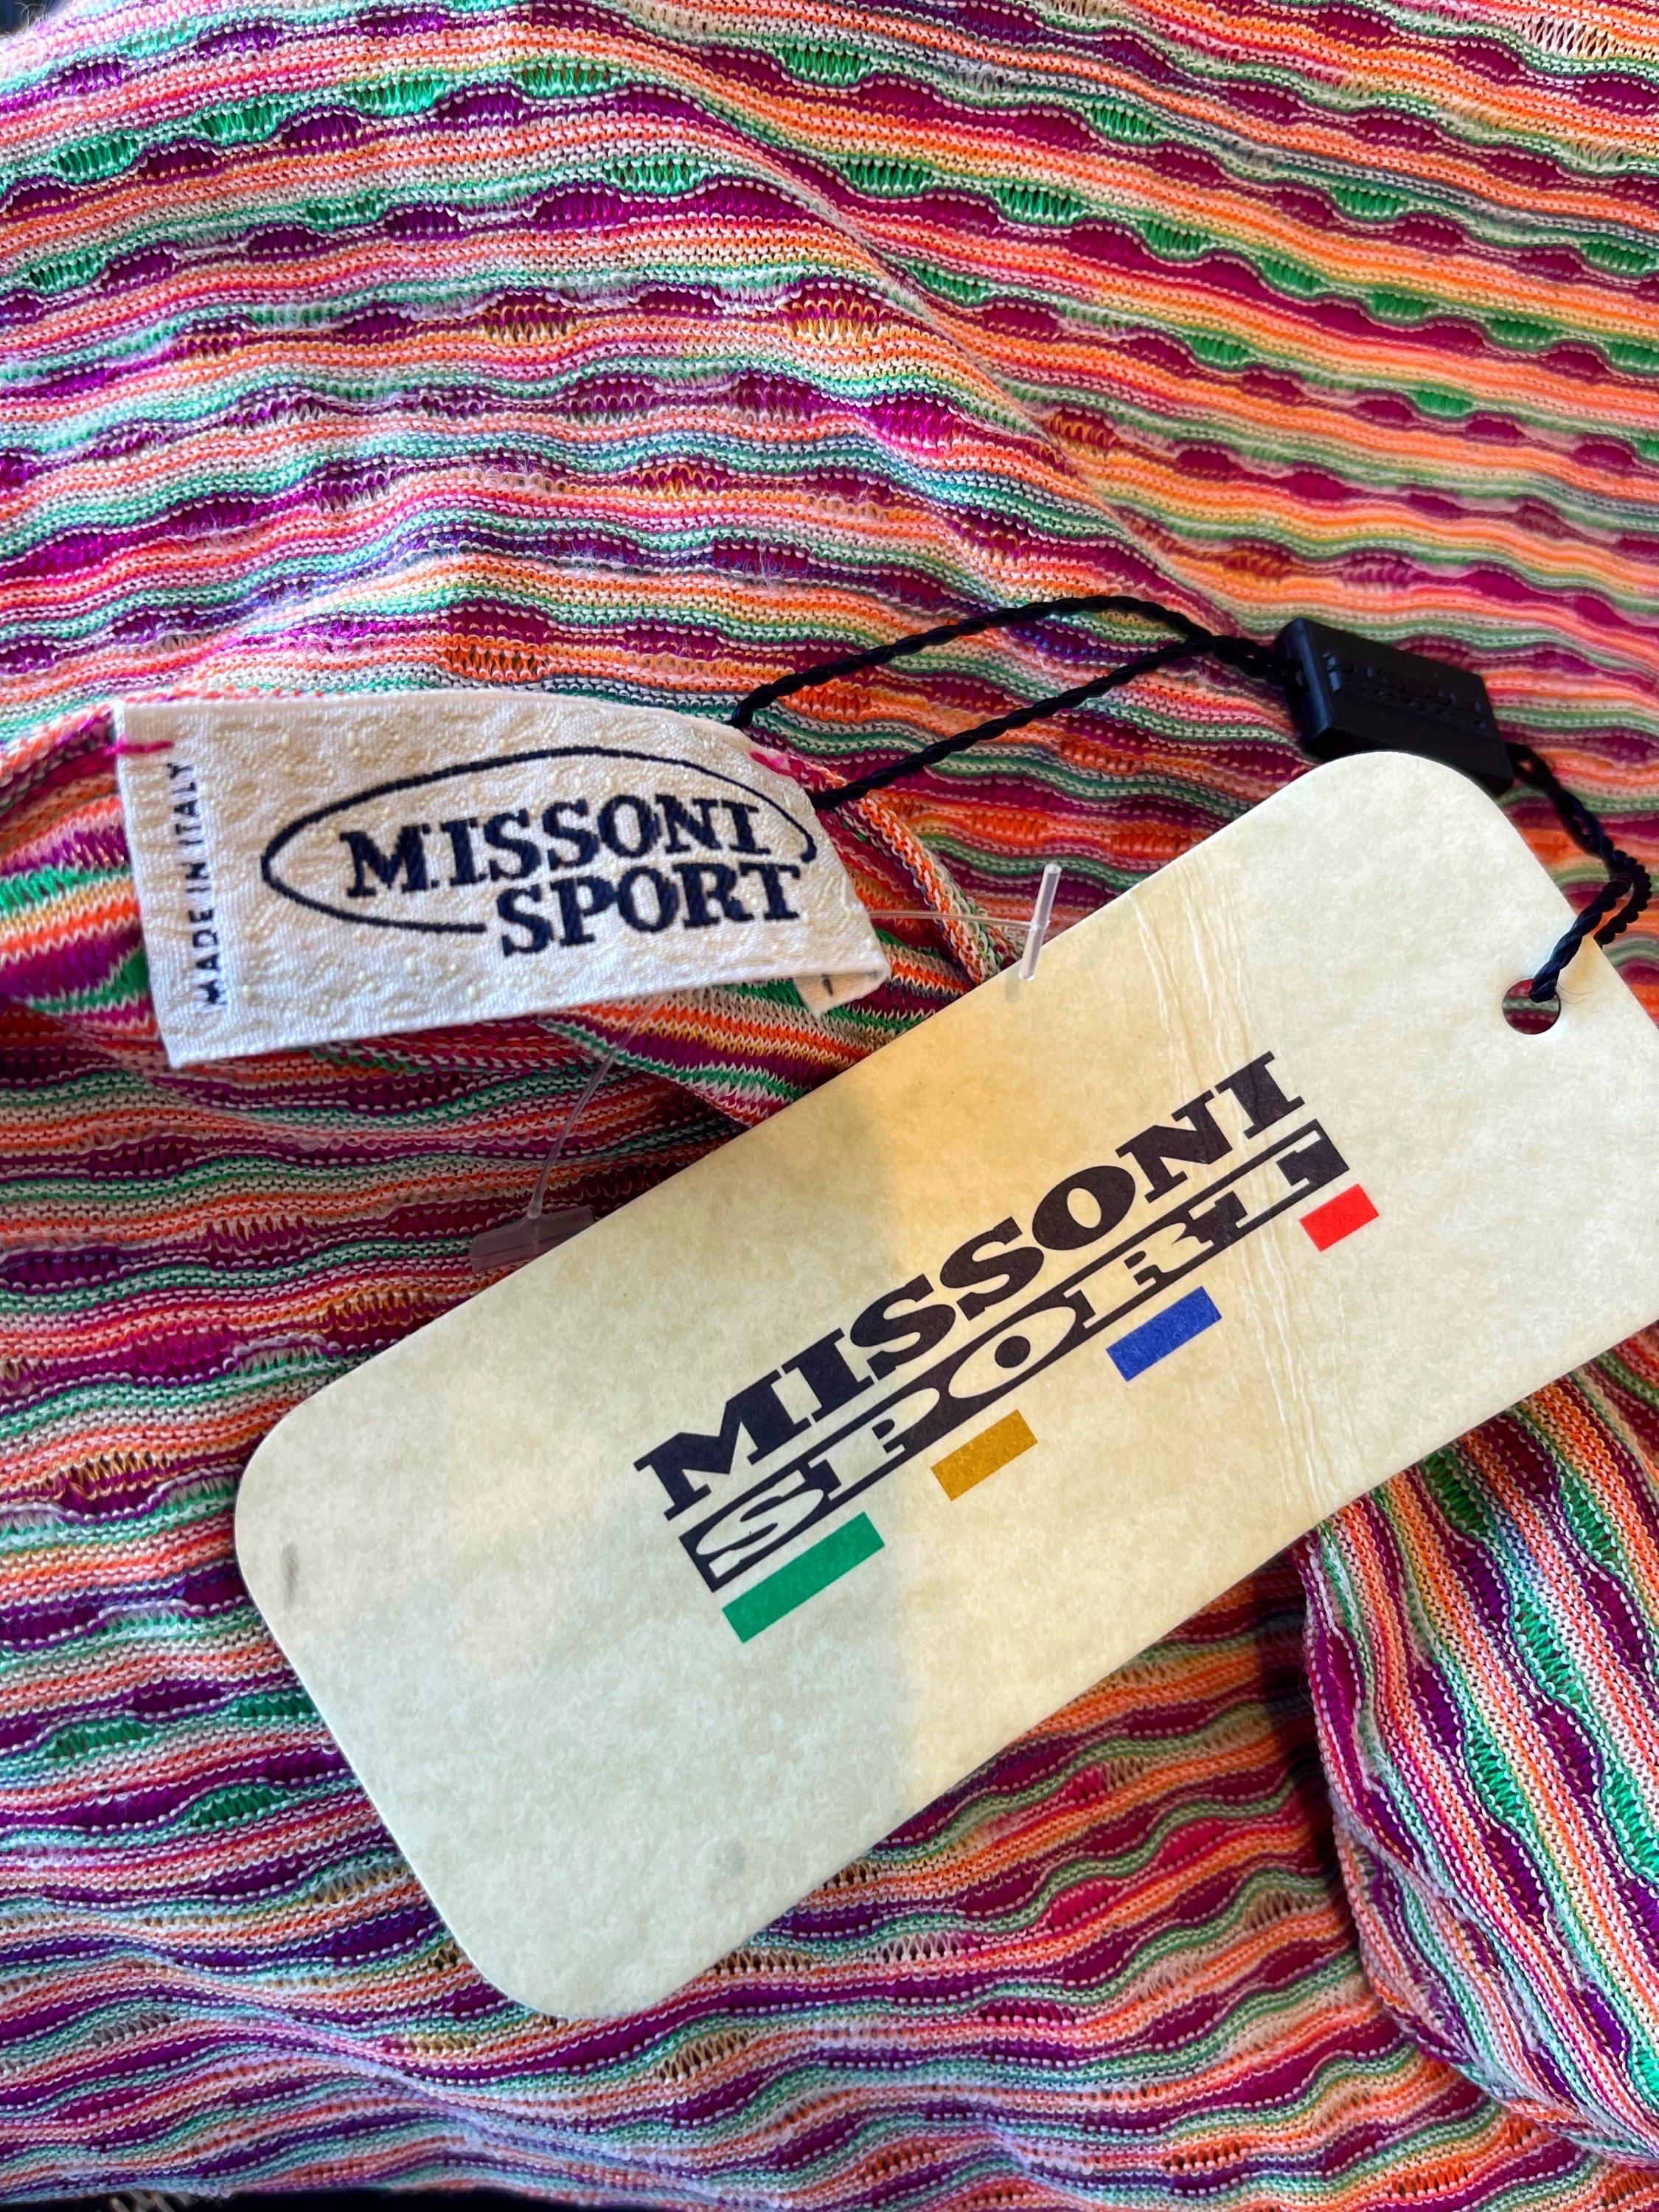 Beautiful new with original tags MISSONI SPORT colorful cotton and rayon t-shirt ! Features vibrant colors of pink, purple, green, and orange. Simply slips over the head and stretches to fit. 
Made in Italy
Model is 5’8, and US Size 6
Marked Size 44